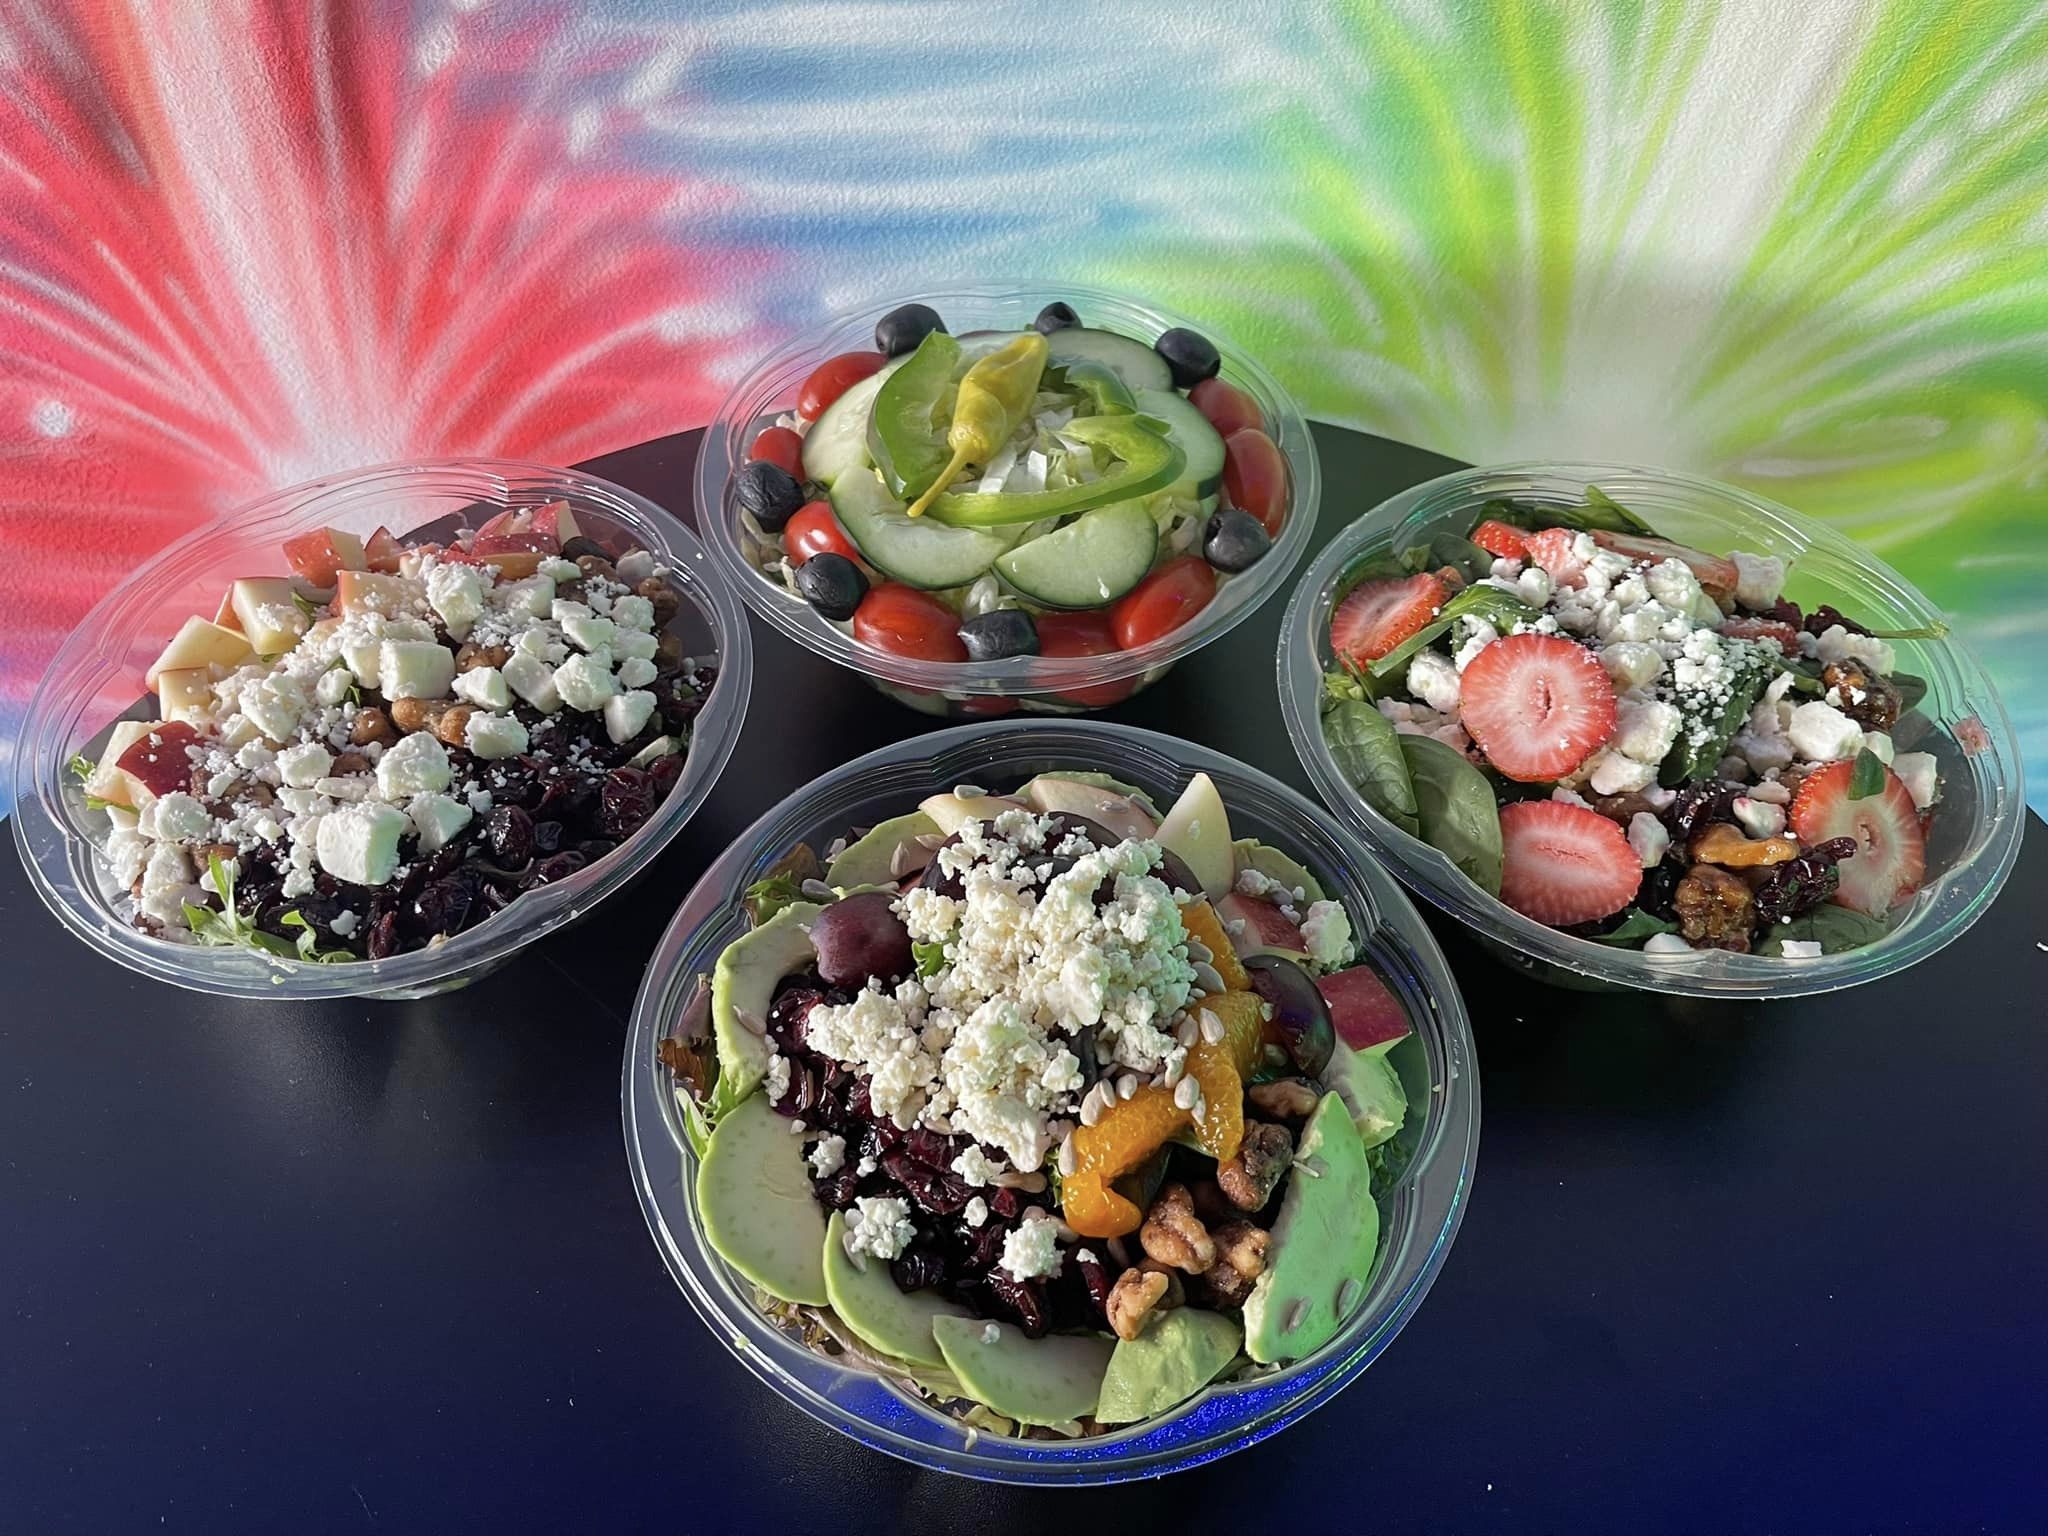 Island Smoothies & Salads in Toms River